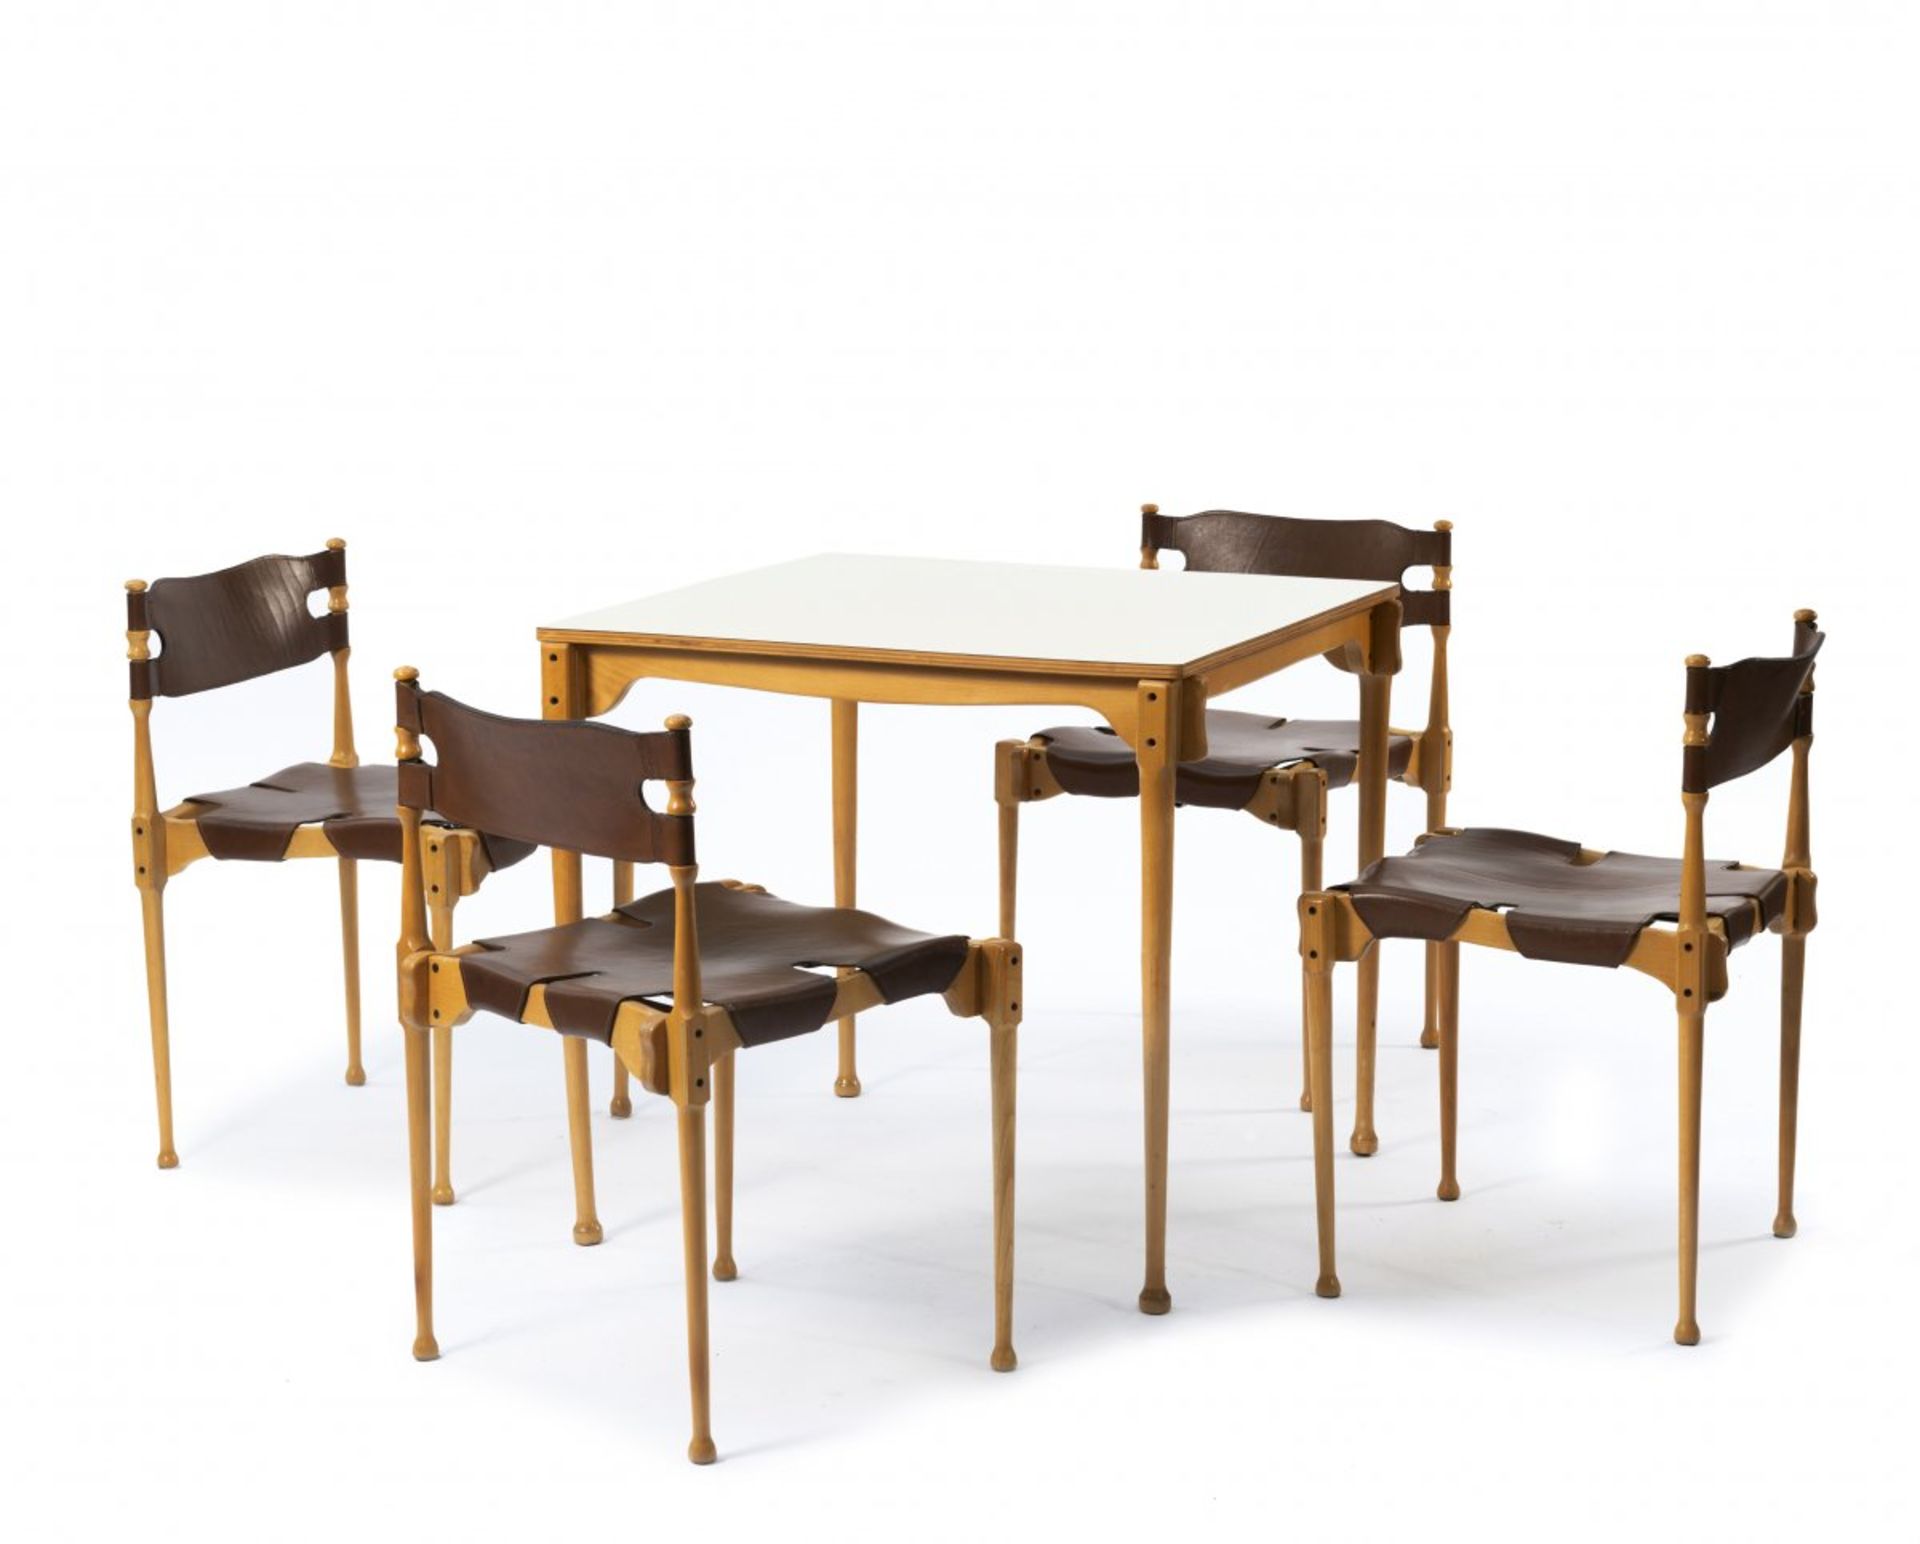 Frei Otto, 4 'Montreal'chairs and table, 1967